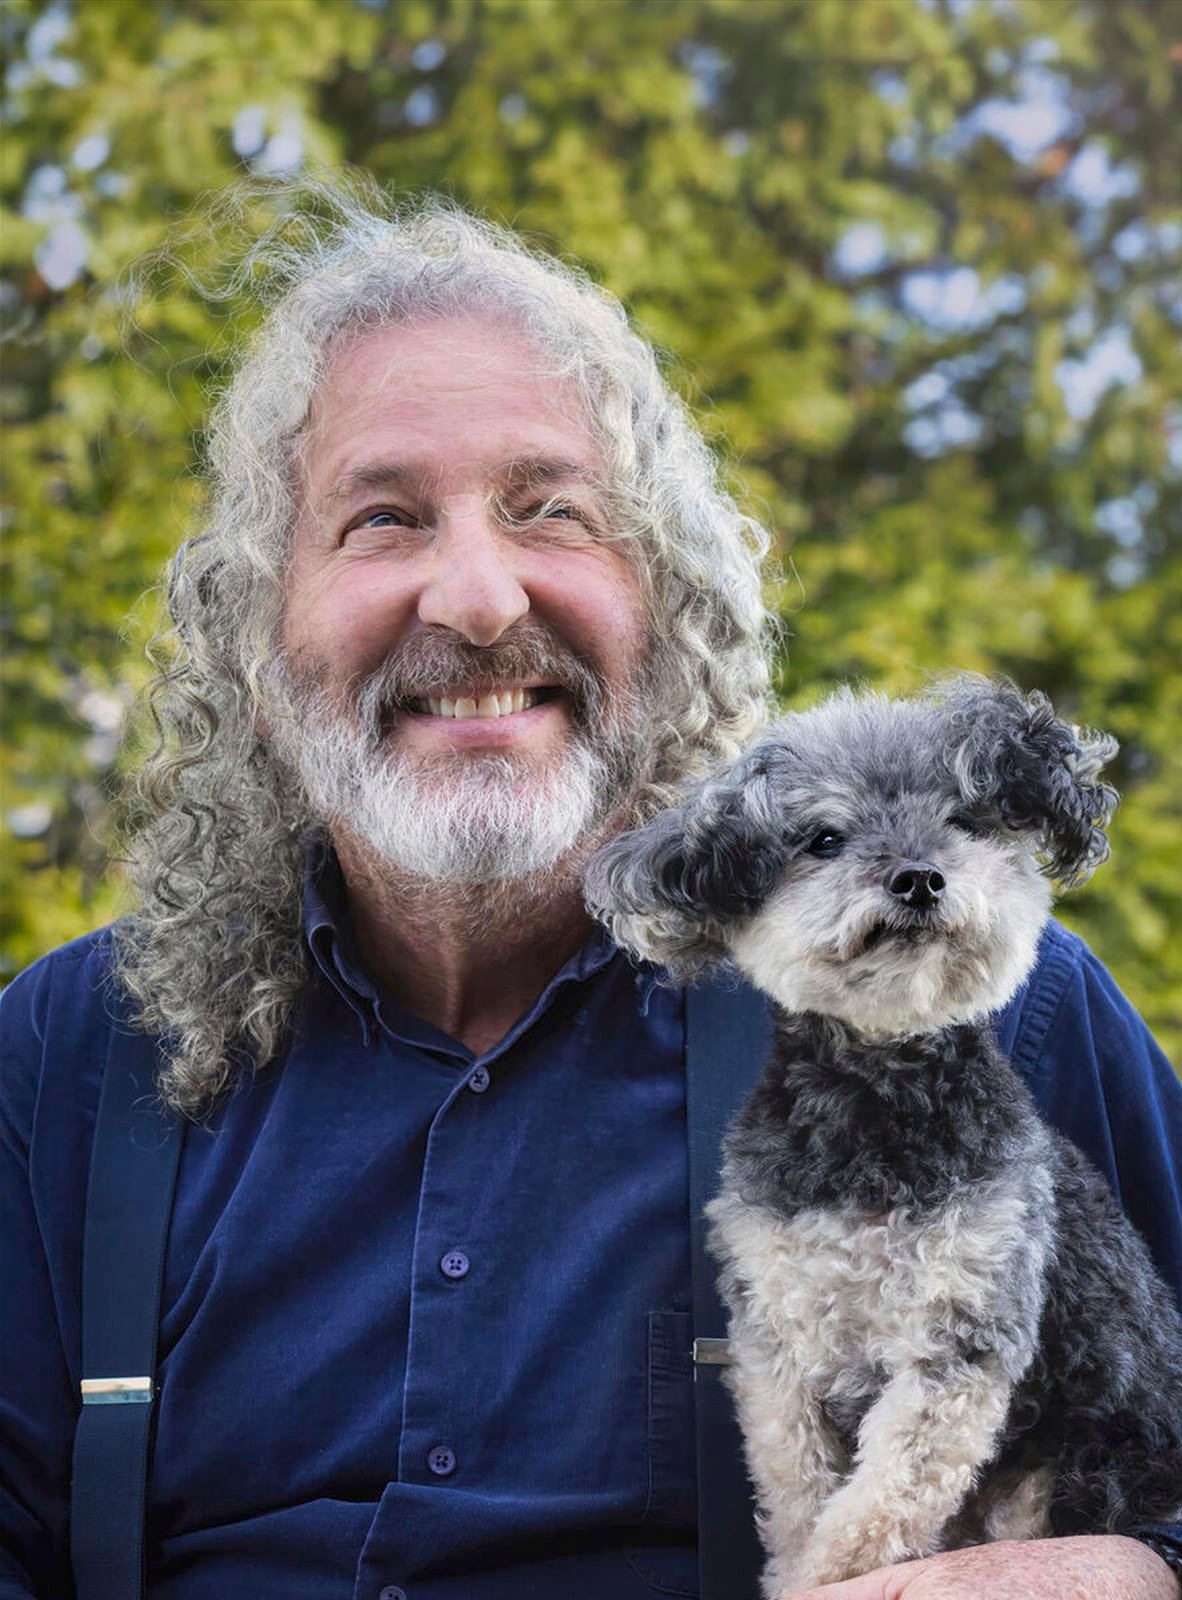 A cheerful elderly man with curly gray hair holding a small black and white dog, both smiling at the camera, against a blurred green foliage background.